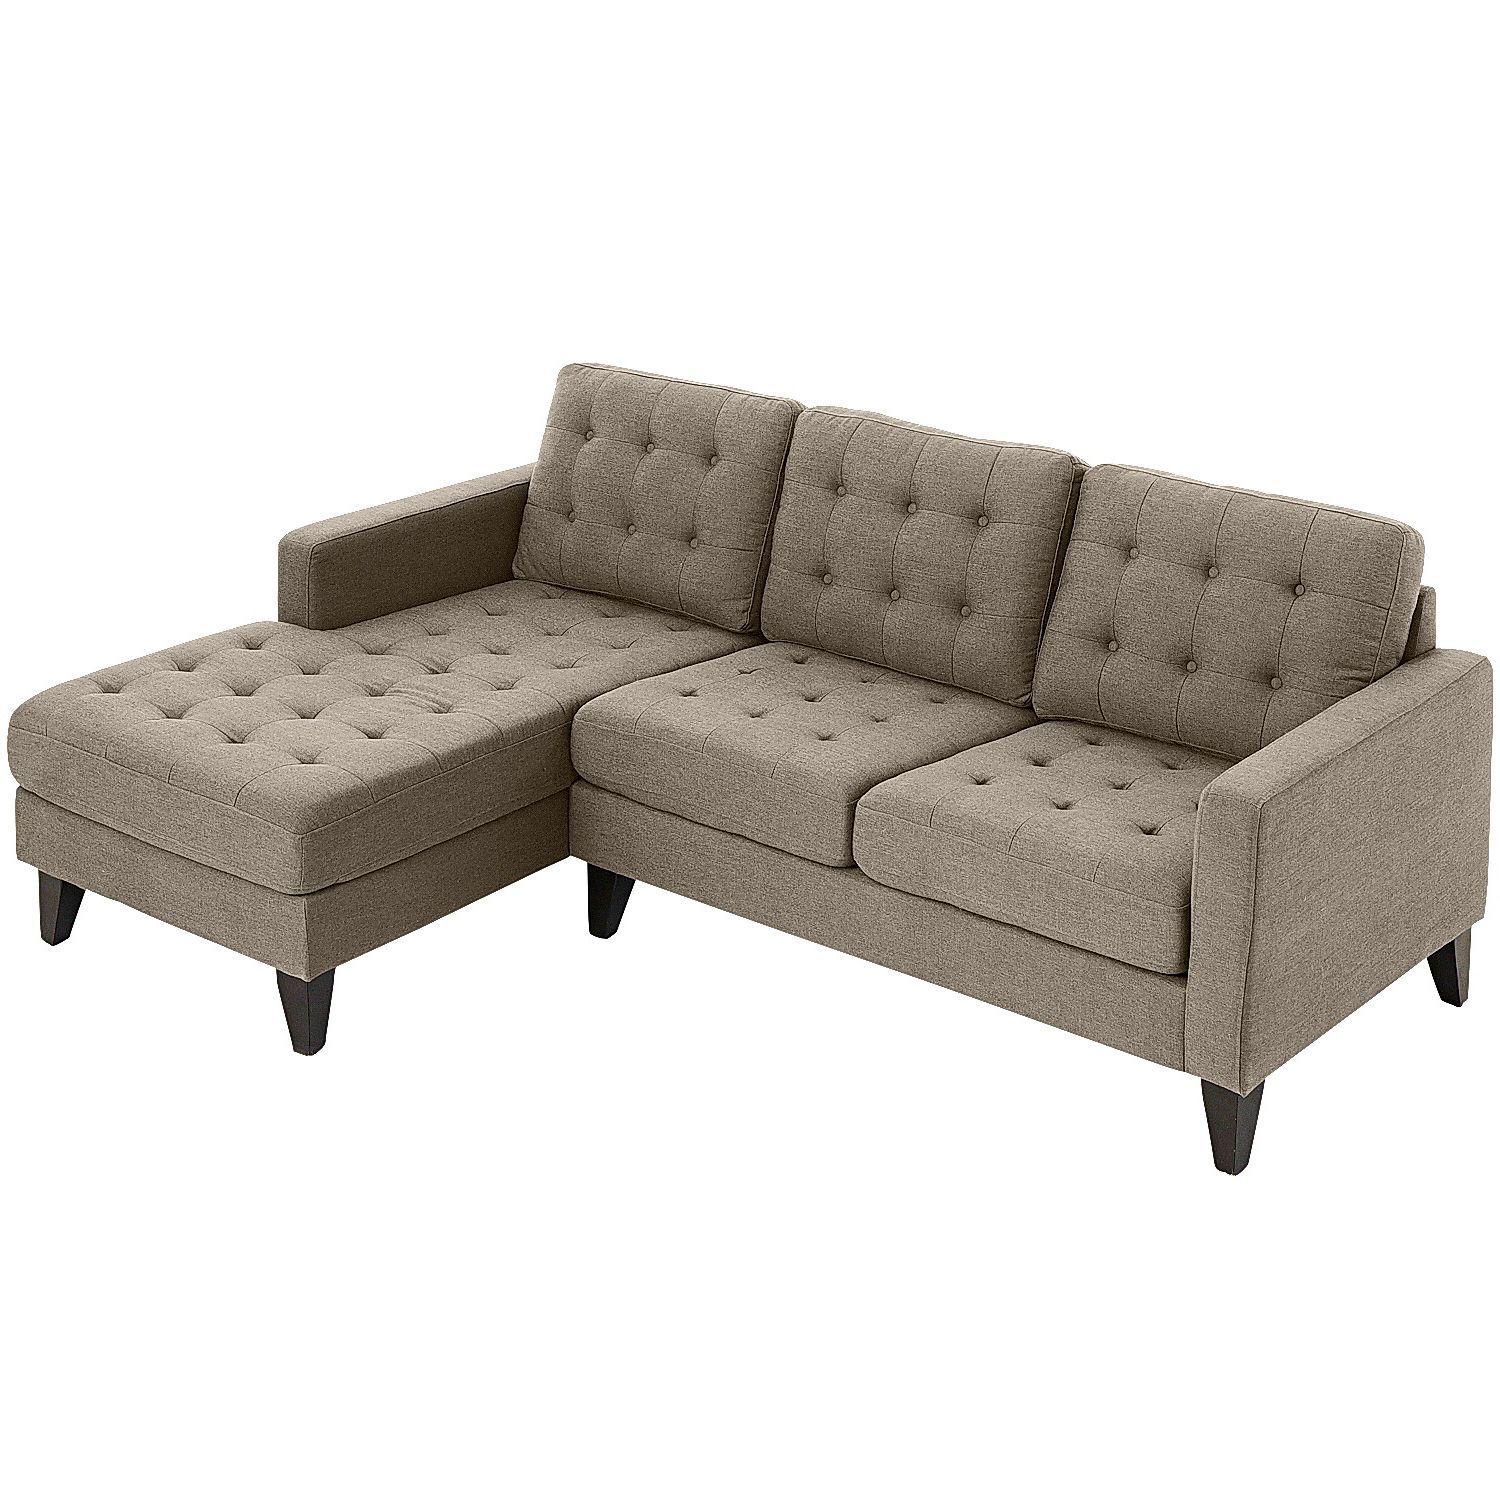 Nyle Putty 2 Piece Left Arm Chaise Sectional | Living Room Intended For Element Right Side Chaise Sectional Sofas In Dark Gray Linen And Walnut Legs (View 9 of 15)